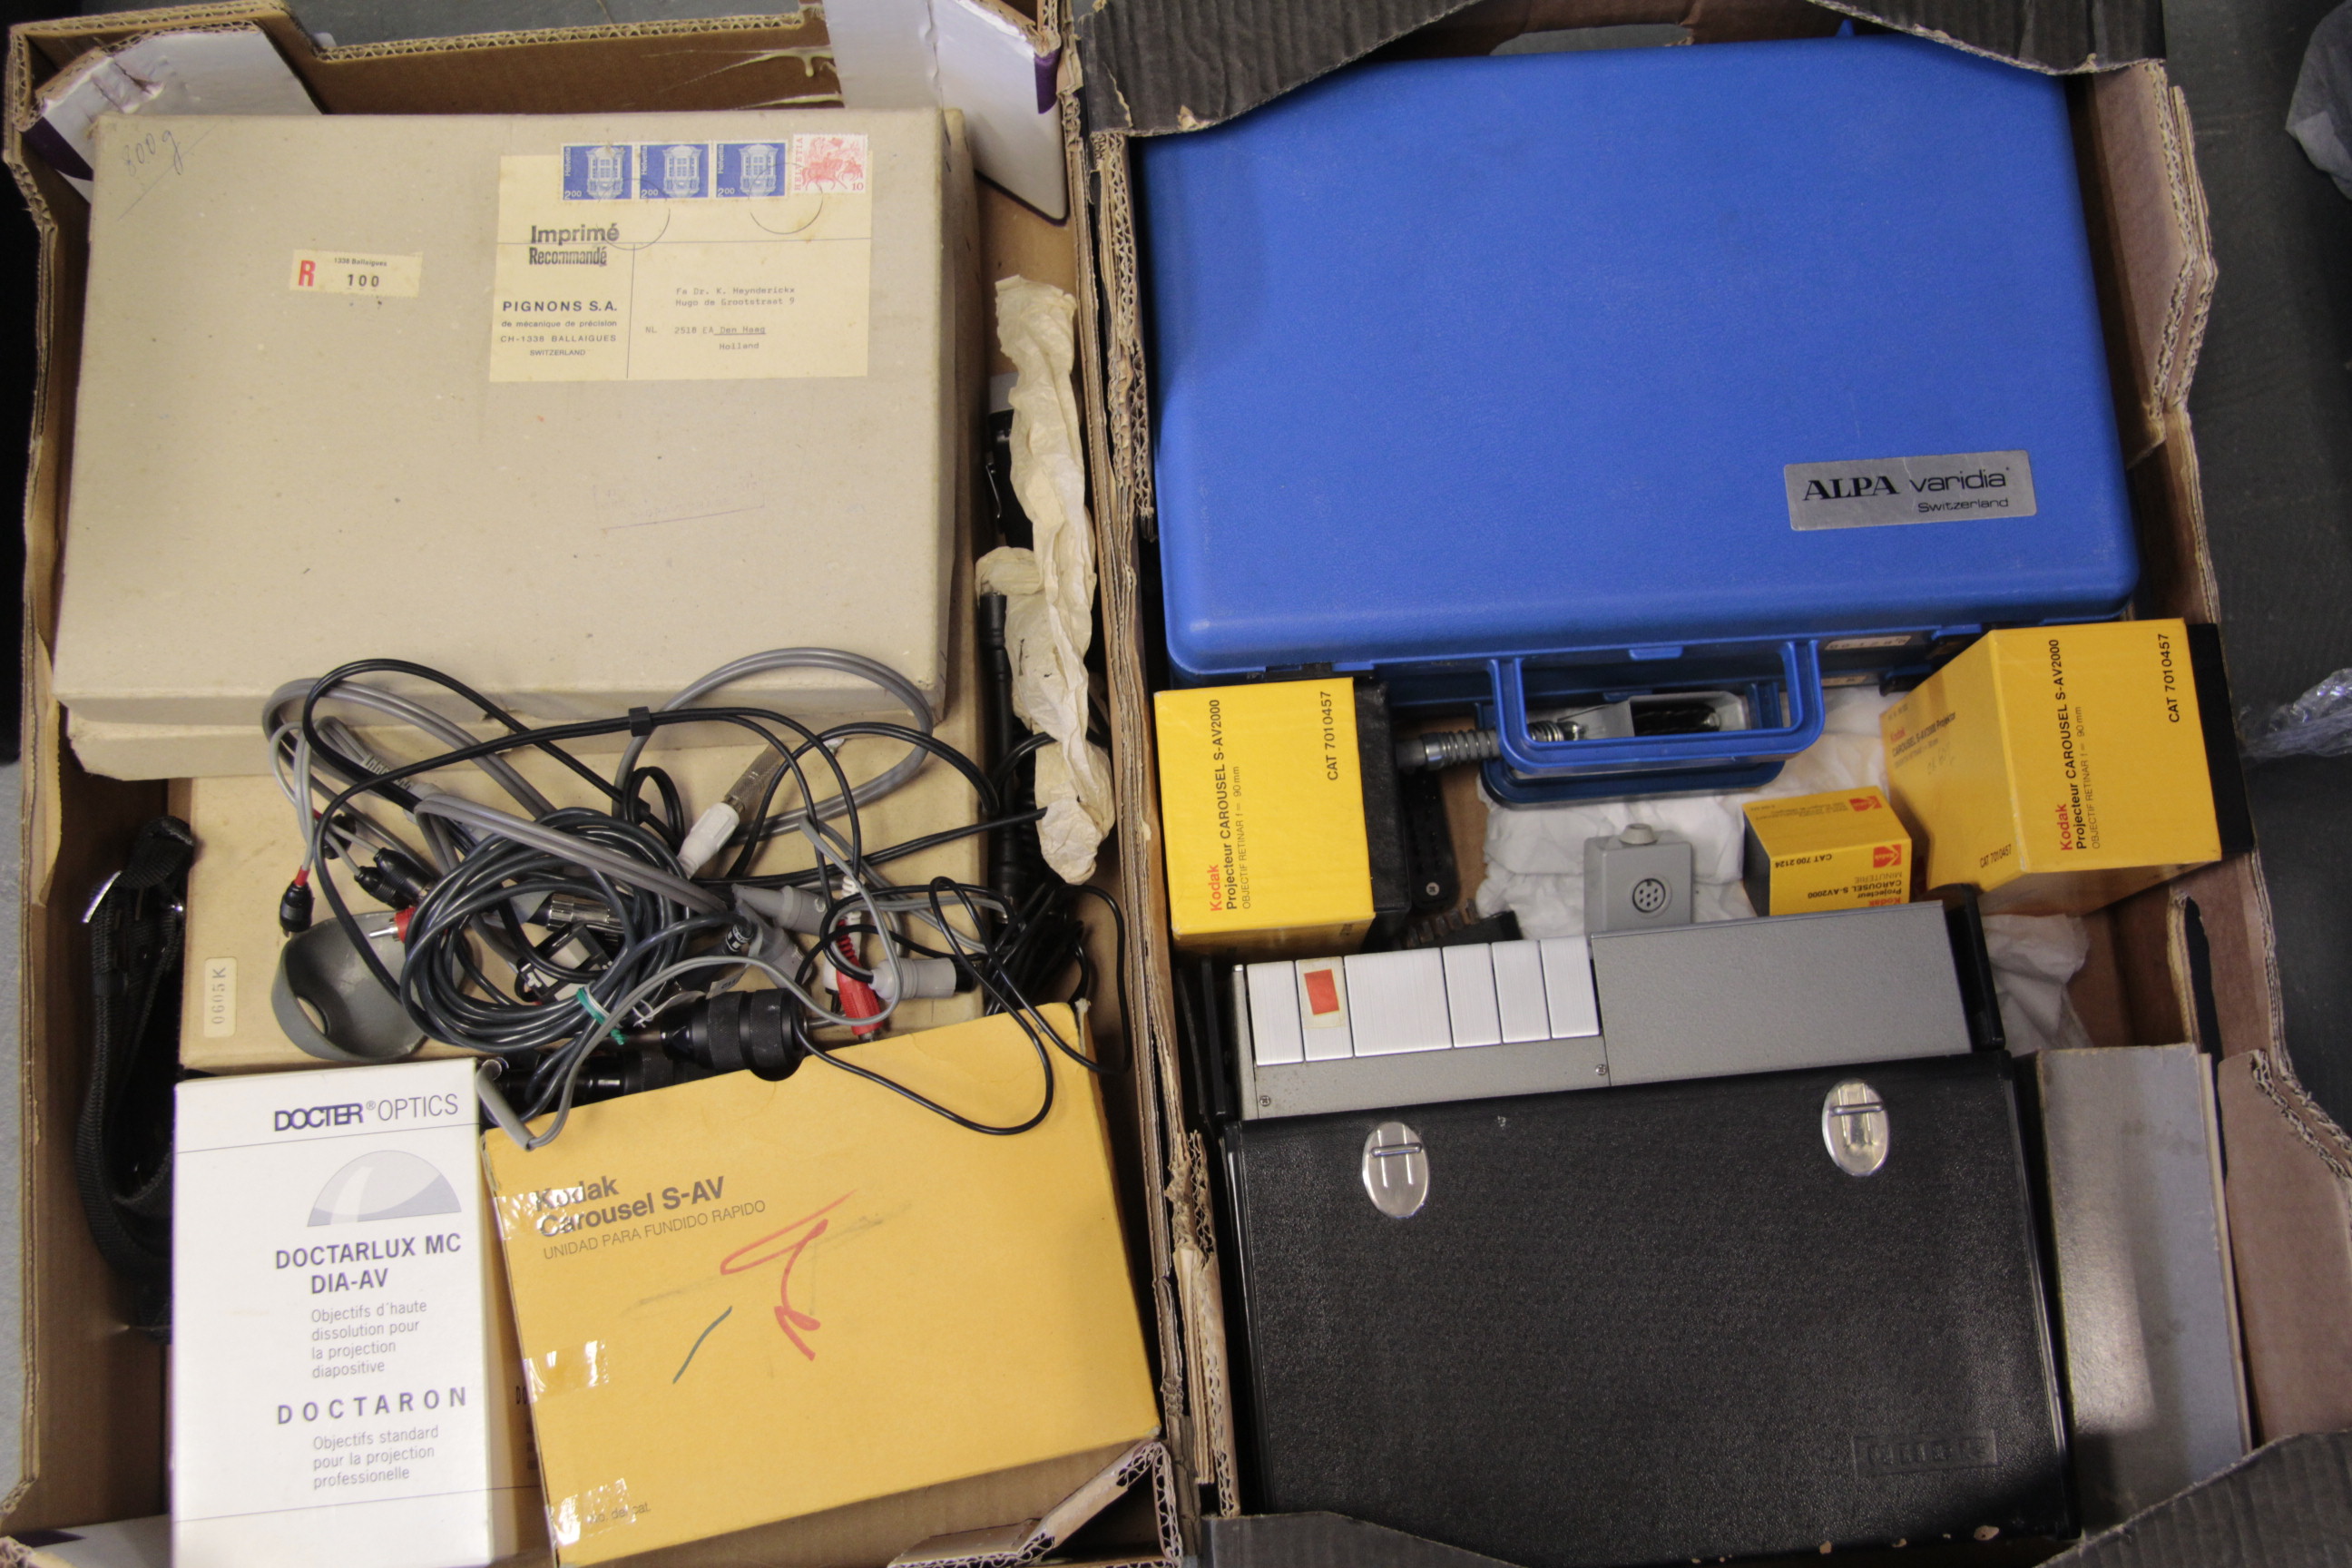 Projection Equipment, including Alpa controls, Kodak Carousel items, a Uher 4200 tape recorder and